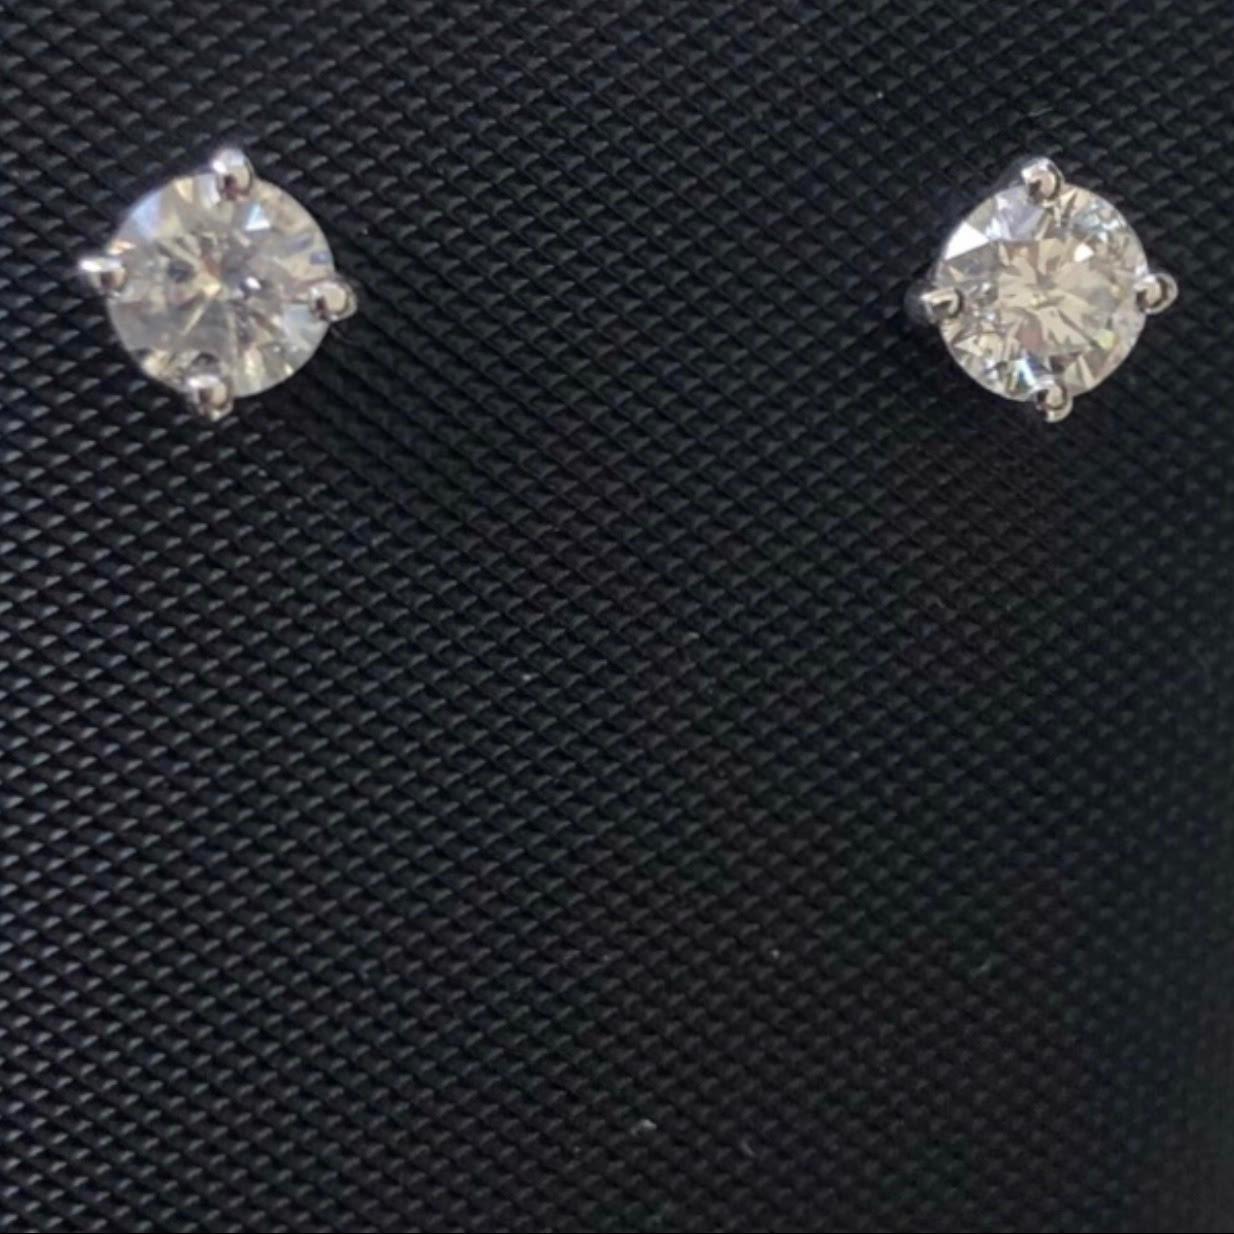 Classic 0.60 Ct solitaire diamond stud earrings in 14k white gold. Pair of natural earth-mined round brilliant diamonds weighing approx. 0.60 carat are prong set in these 14K gold basket studs.

Diamond stud earrings come with solid 14k gold push